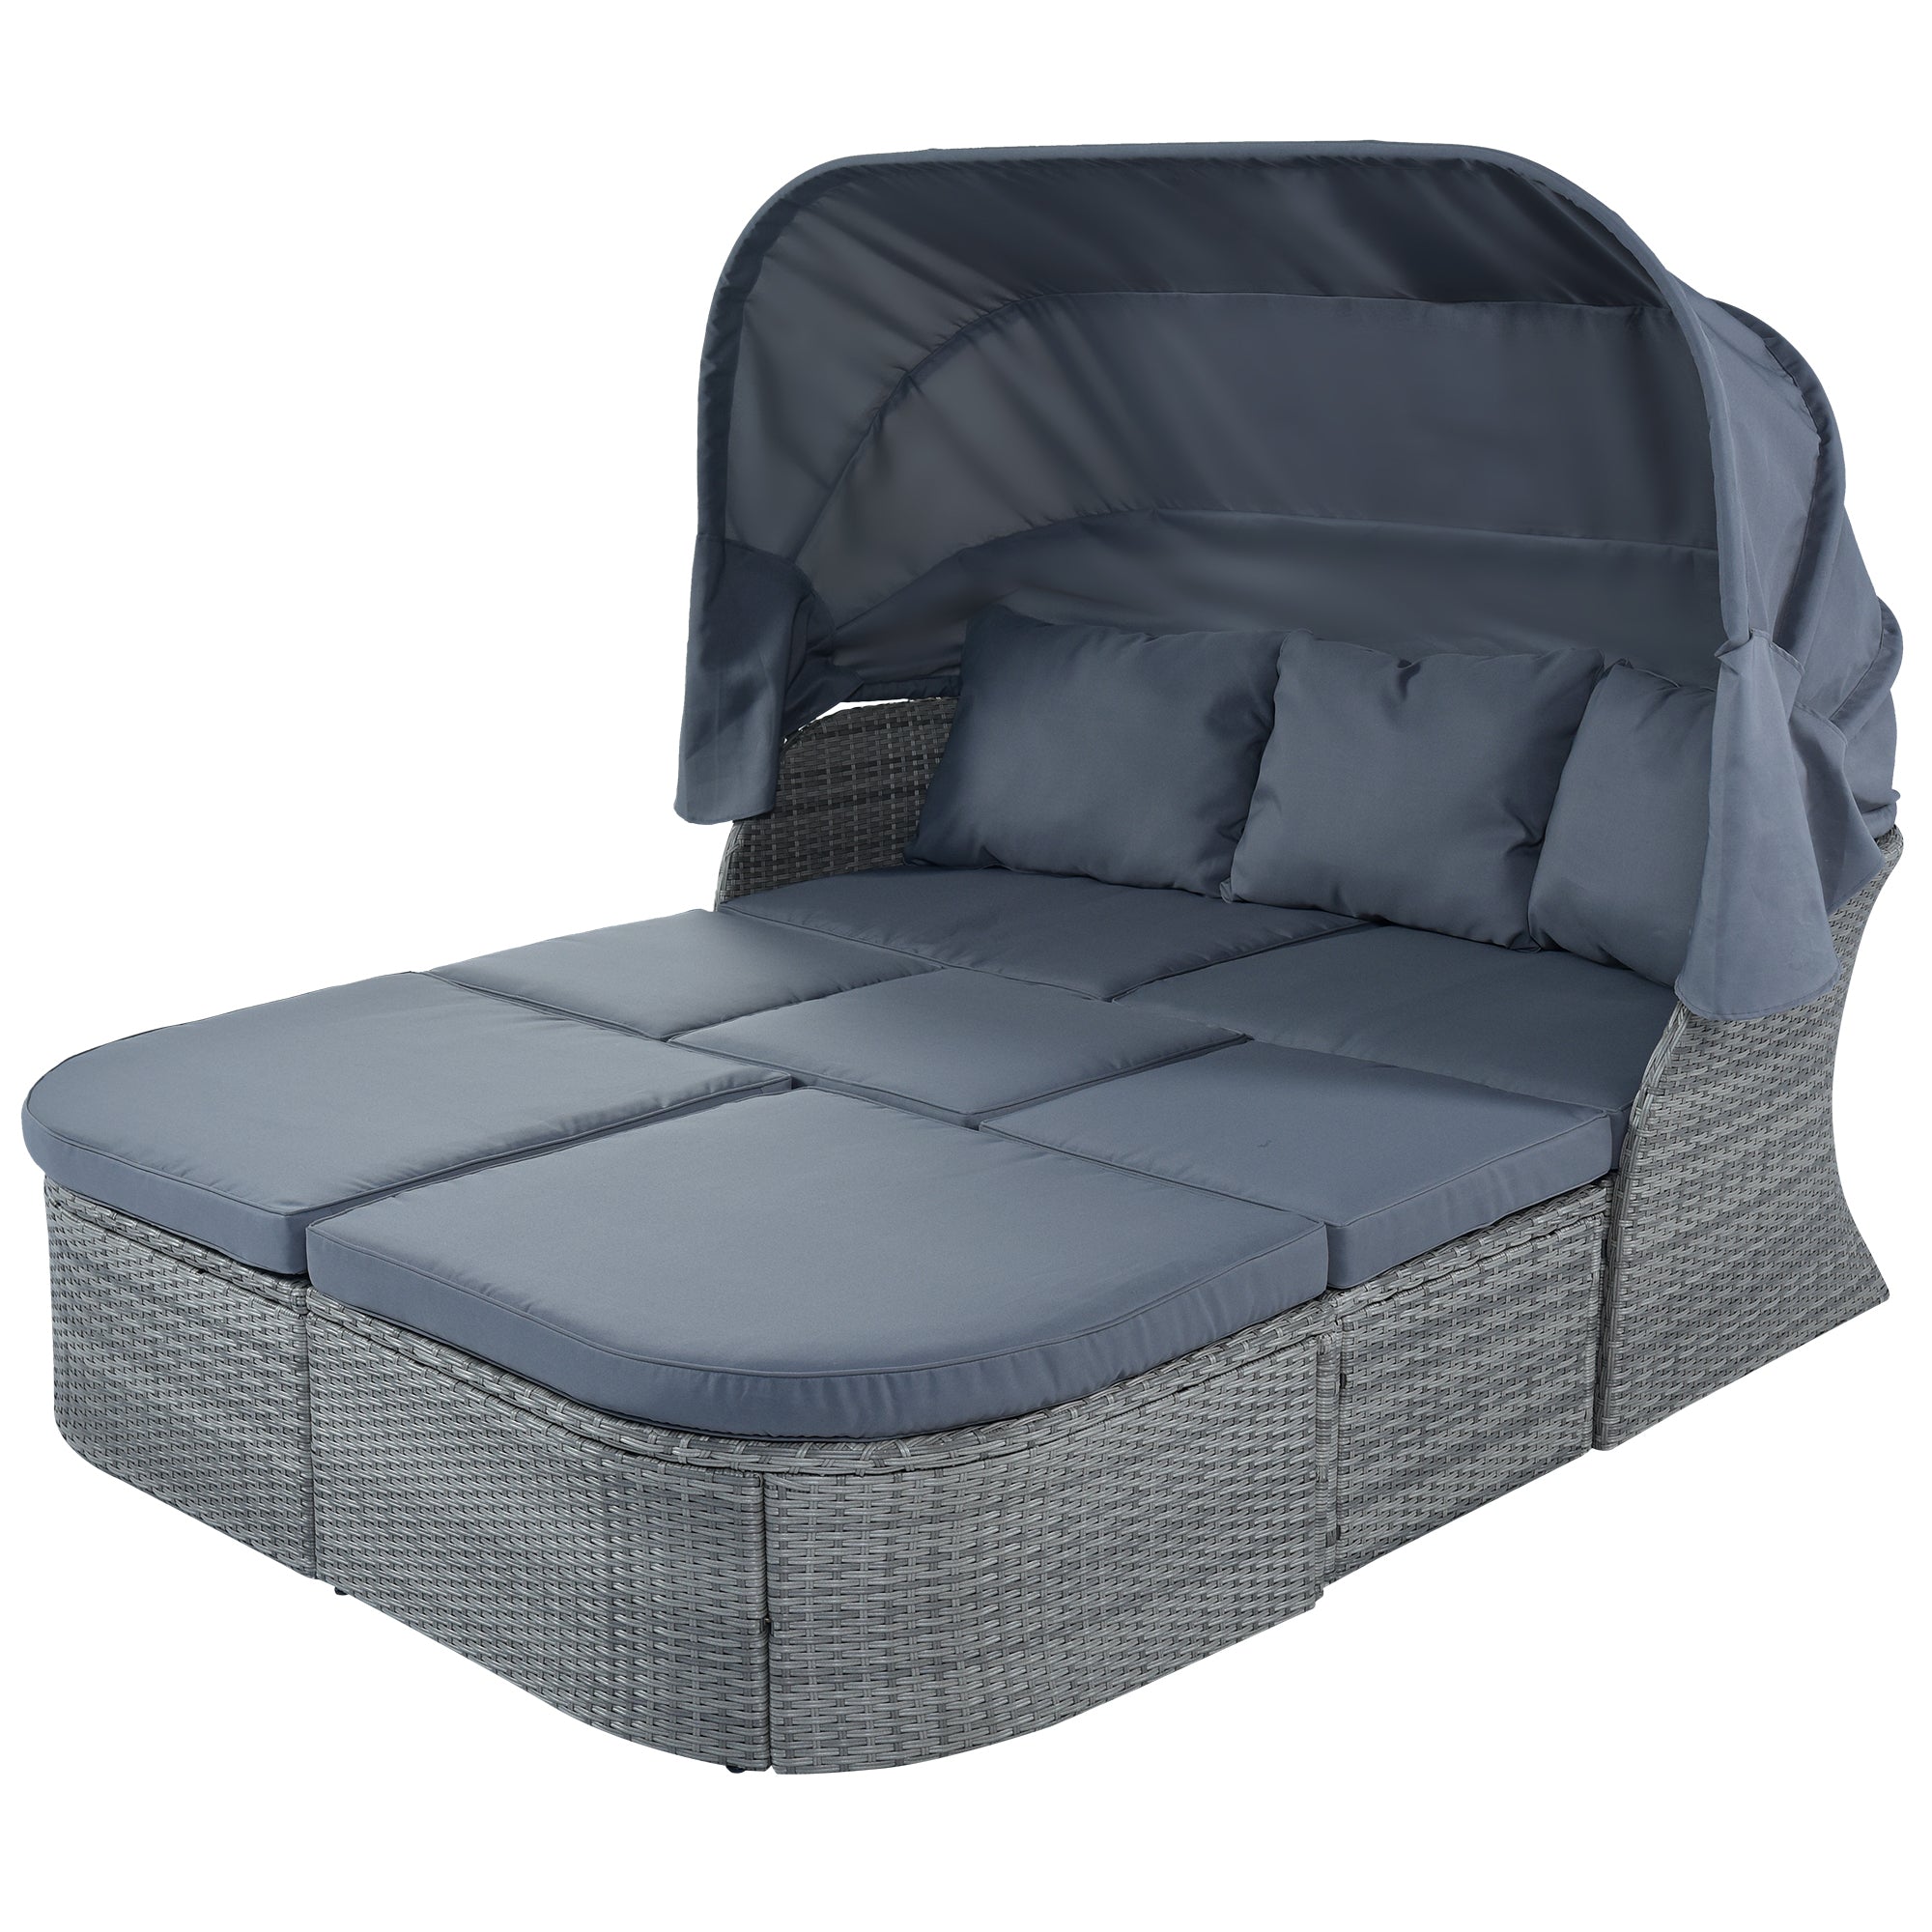 U STYLE Outdoor Patio Furniture Set Daybed Sunbed with gray-rattan